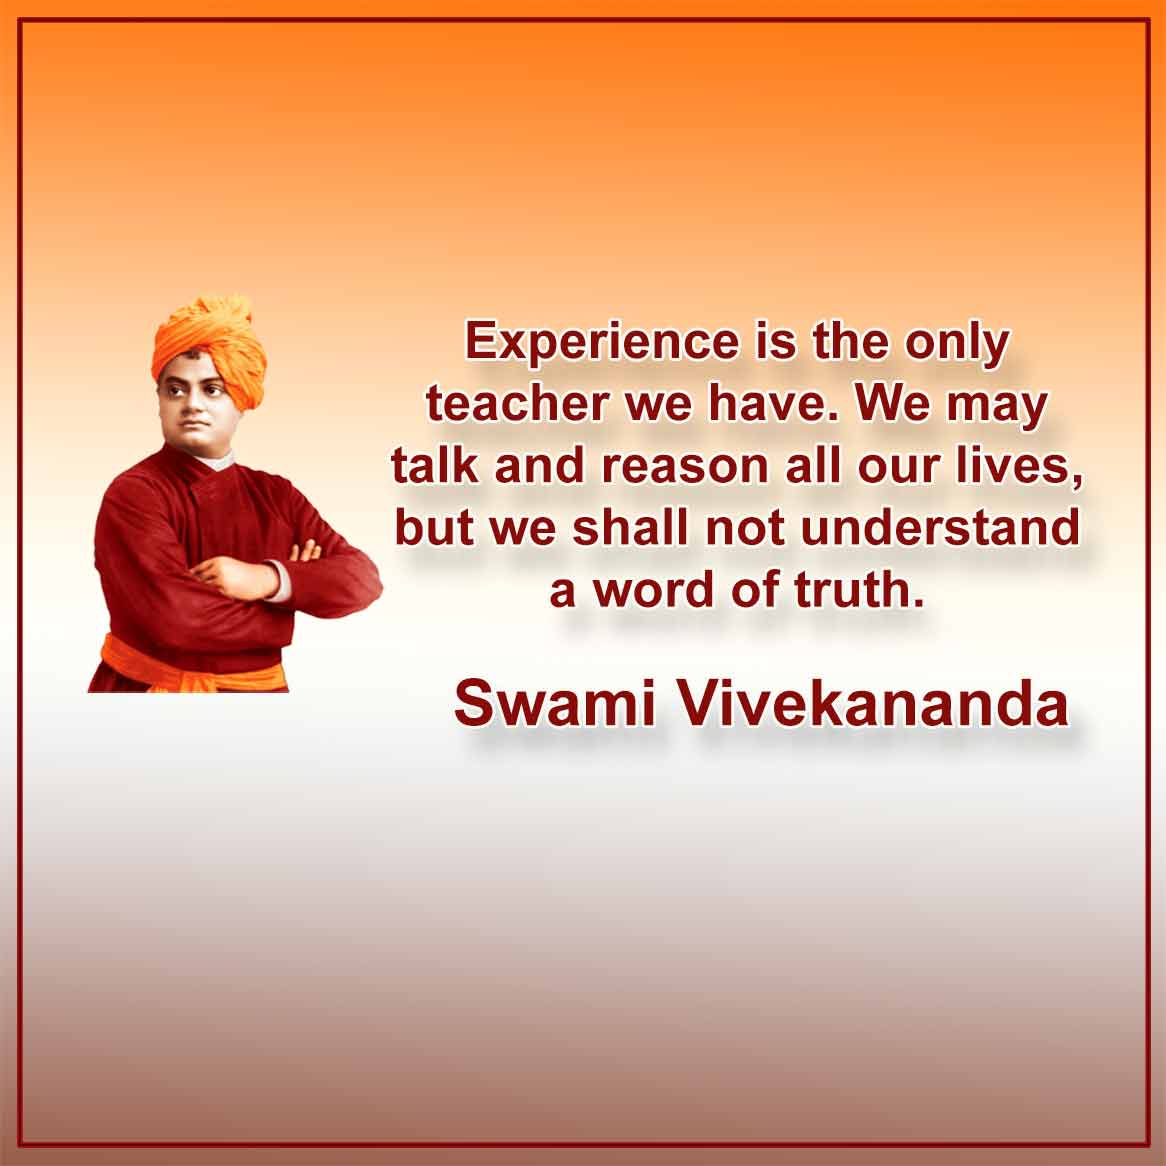 Experience is the only teacher we have. We may talk and reason all our lives, but we shall not understand a word of truth. Swami Vivekananda Slogan